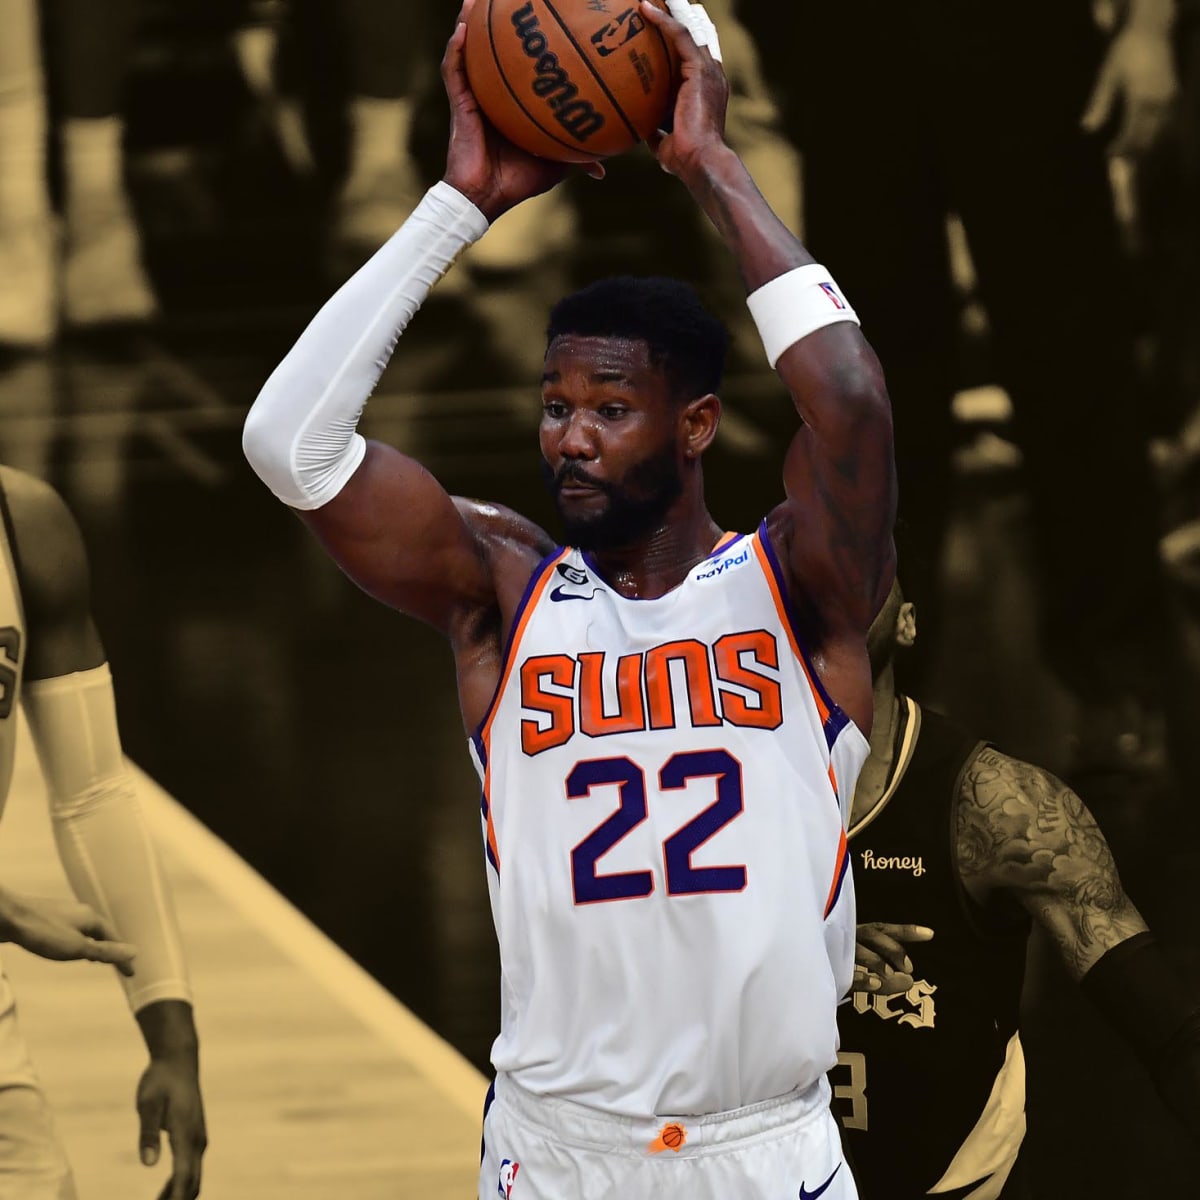 If The NCAA Were The NBA, DeAndre Ayton Would Get $3 Million More